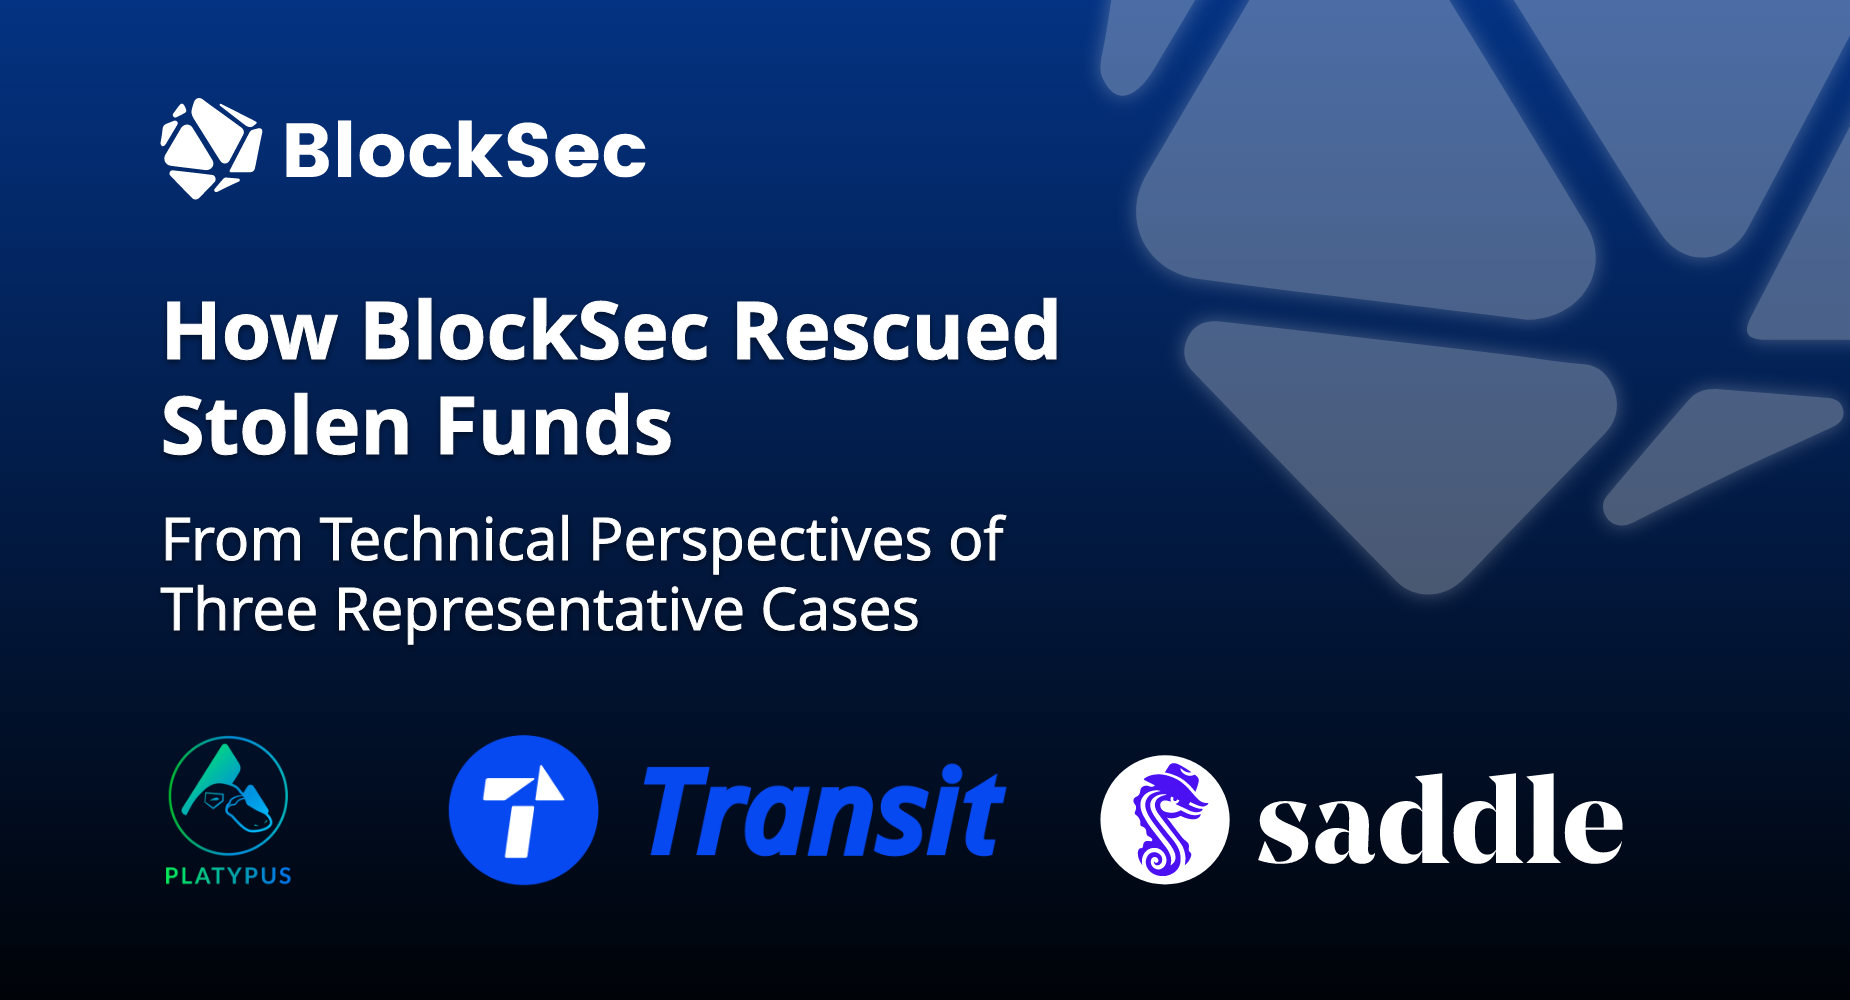 How BlockSec Rescued Stolen Funds: From Technical Perspectives of Three Representative Cases